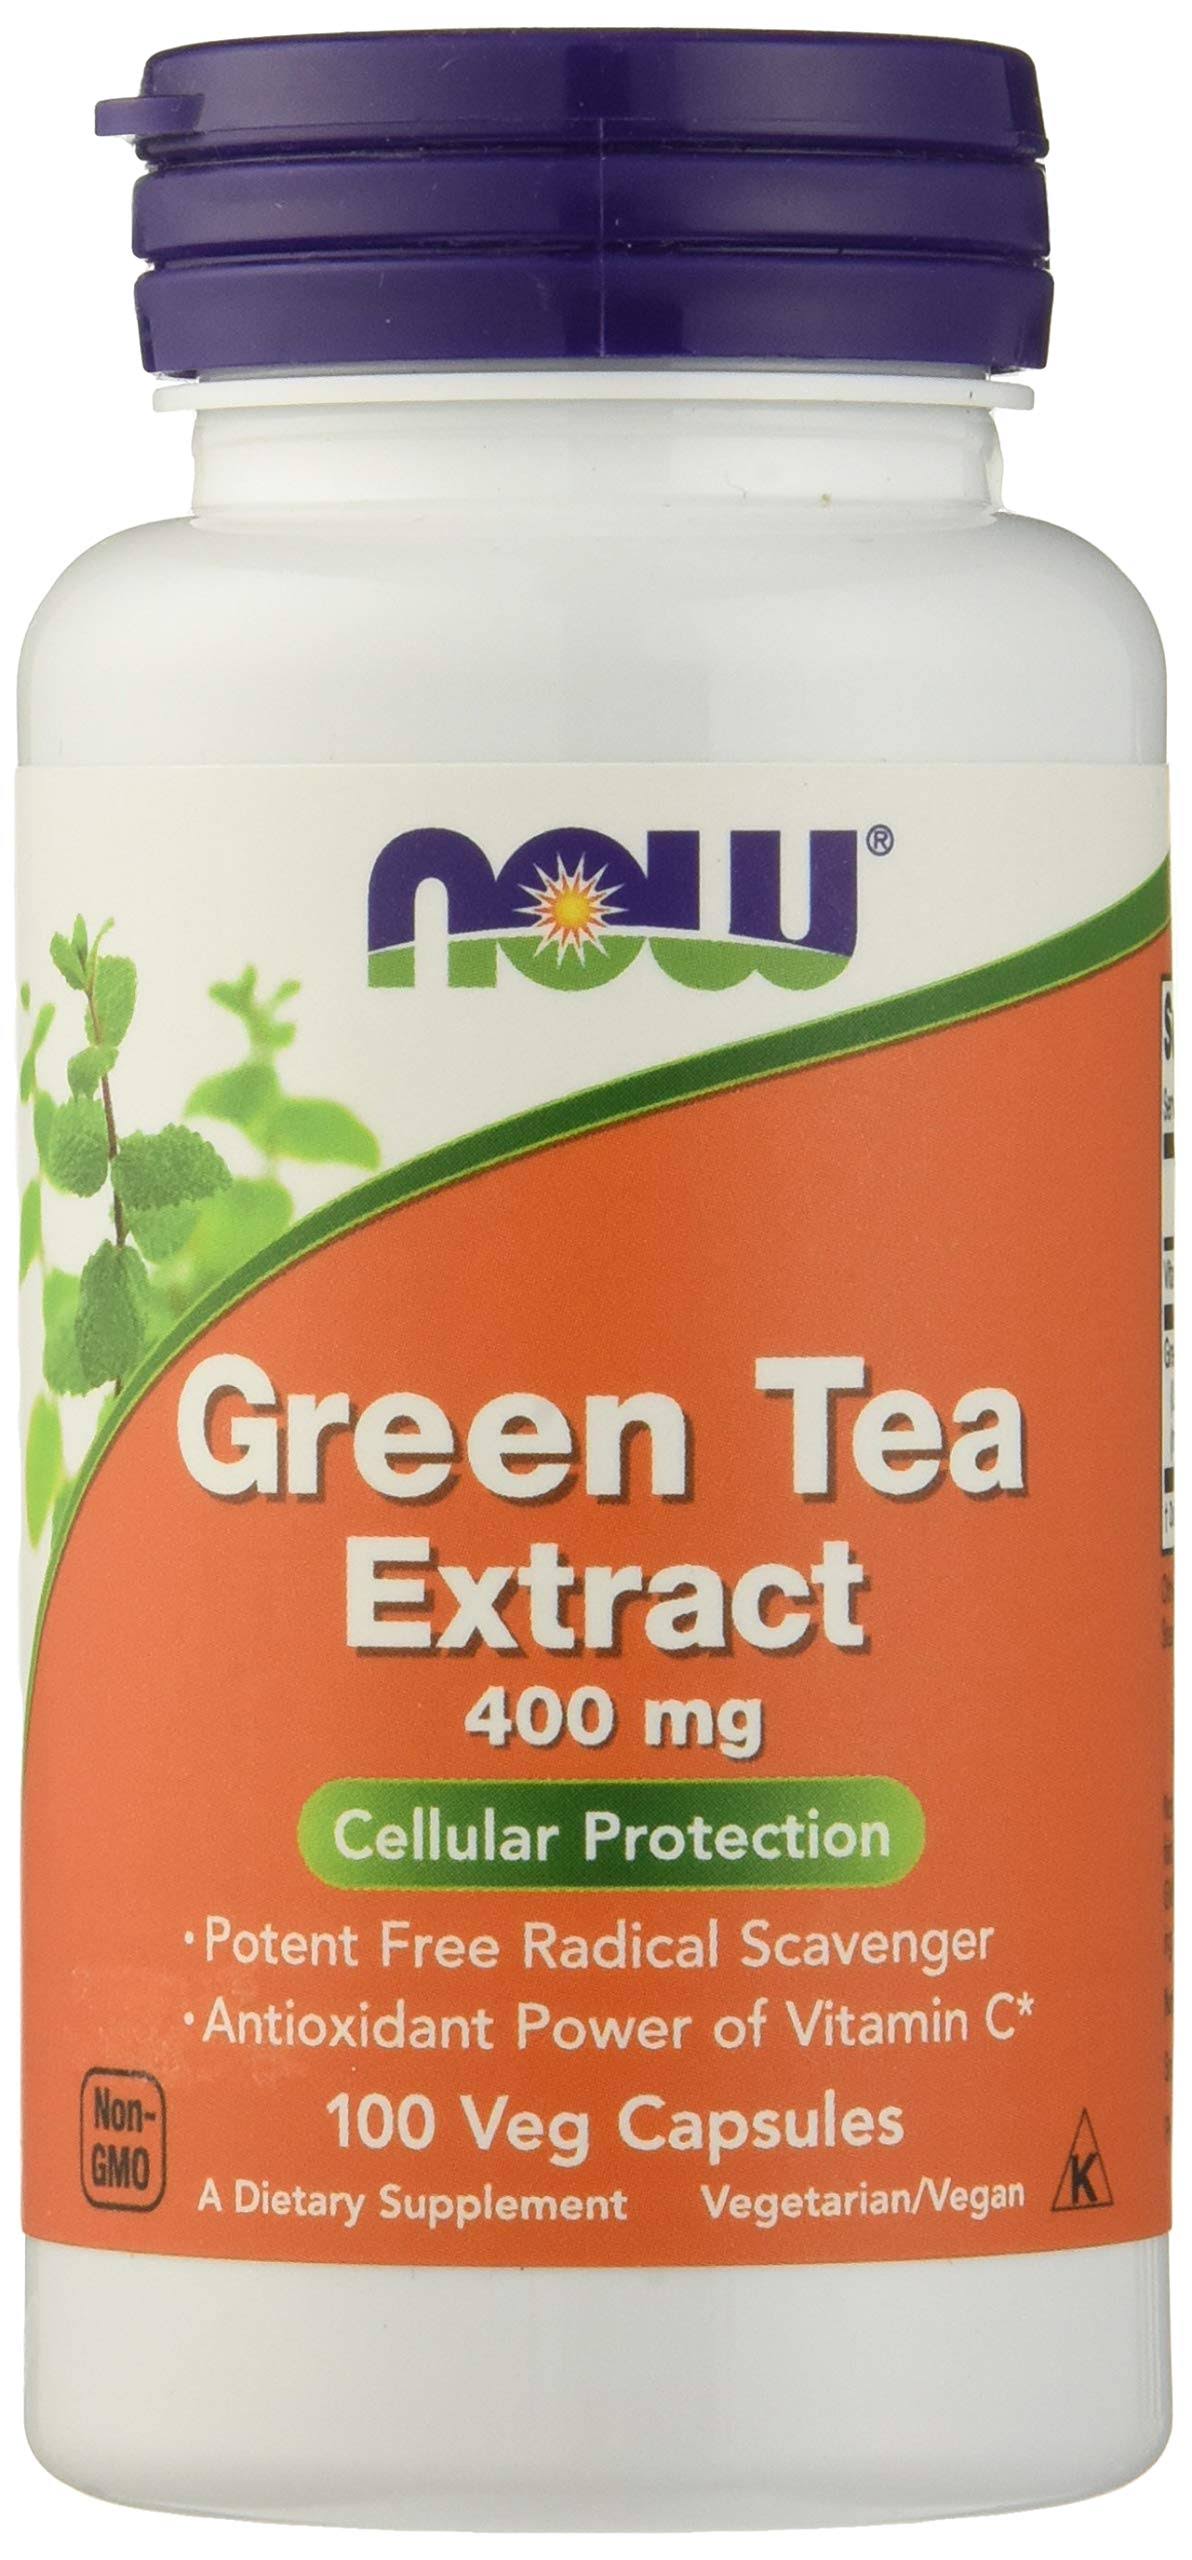 Now Green Tea Extract 400 Mg - 100 Capsules